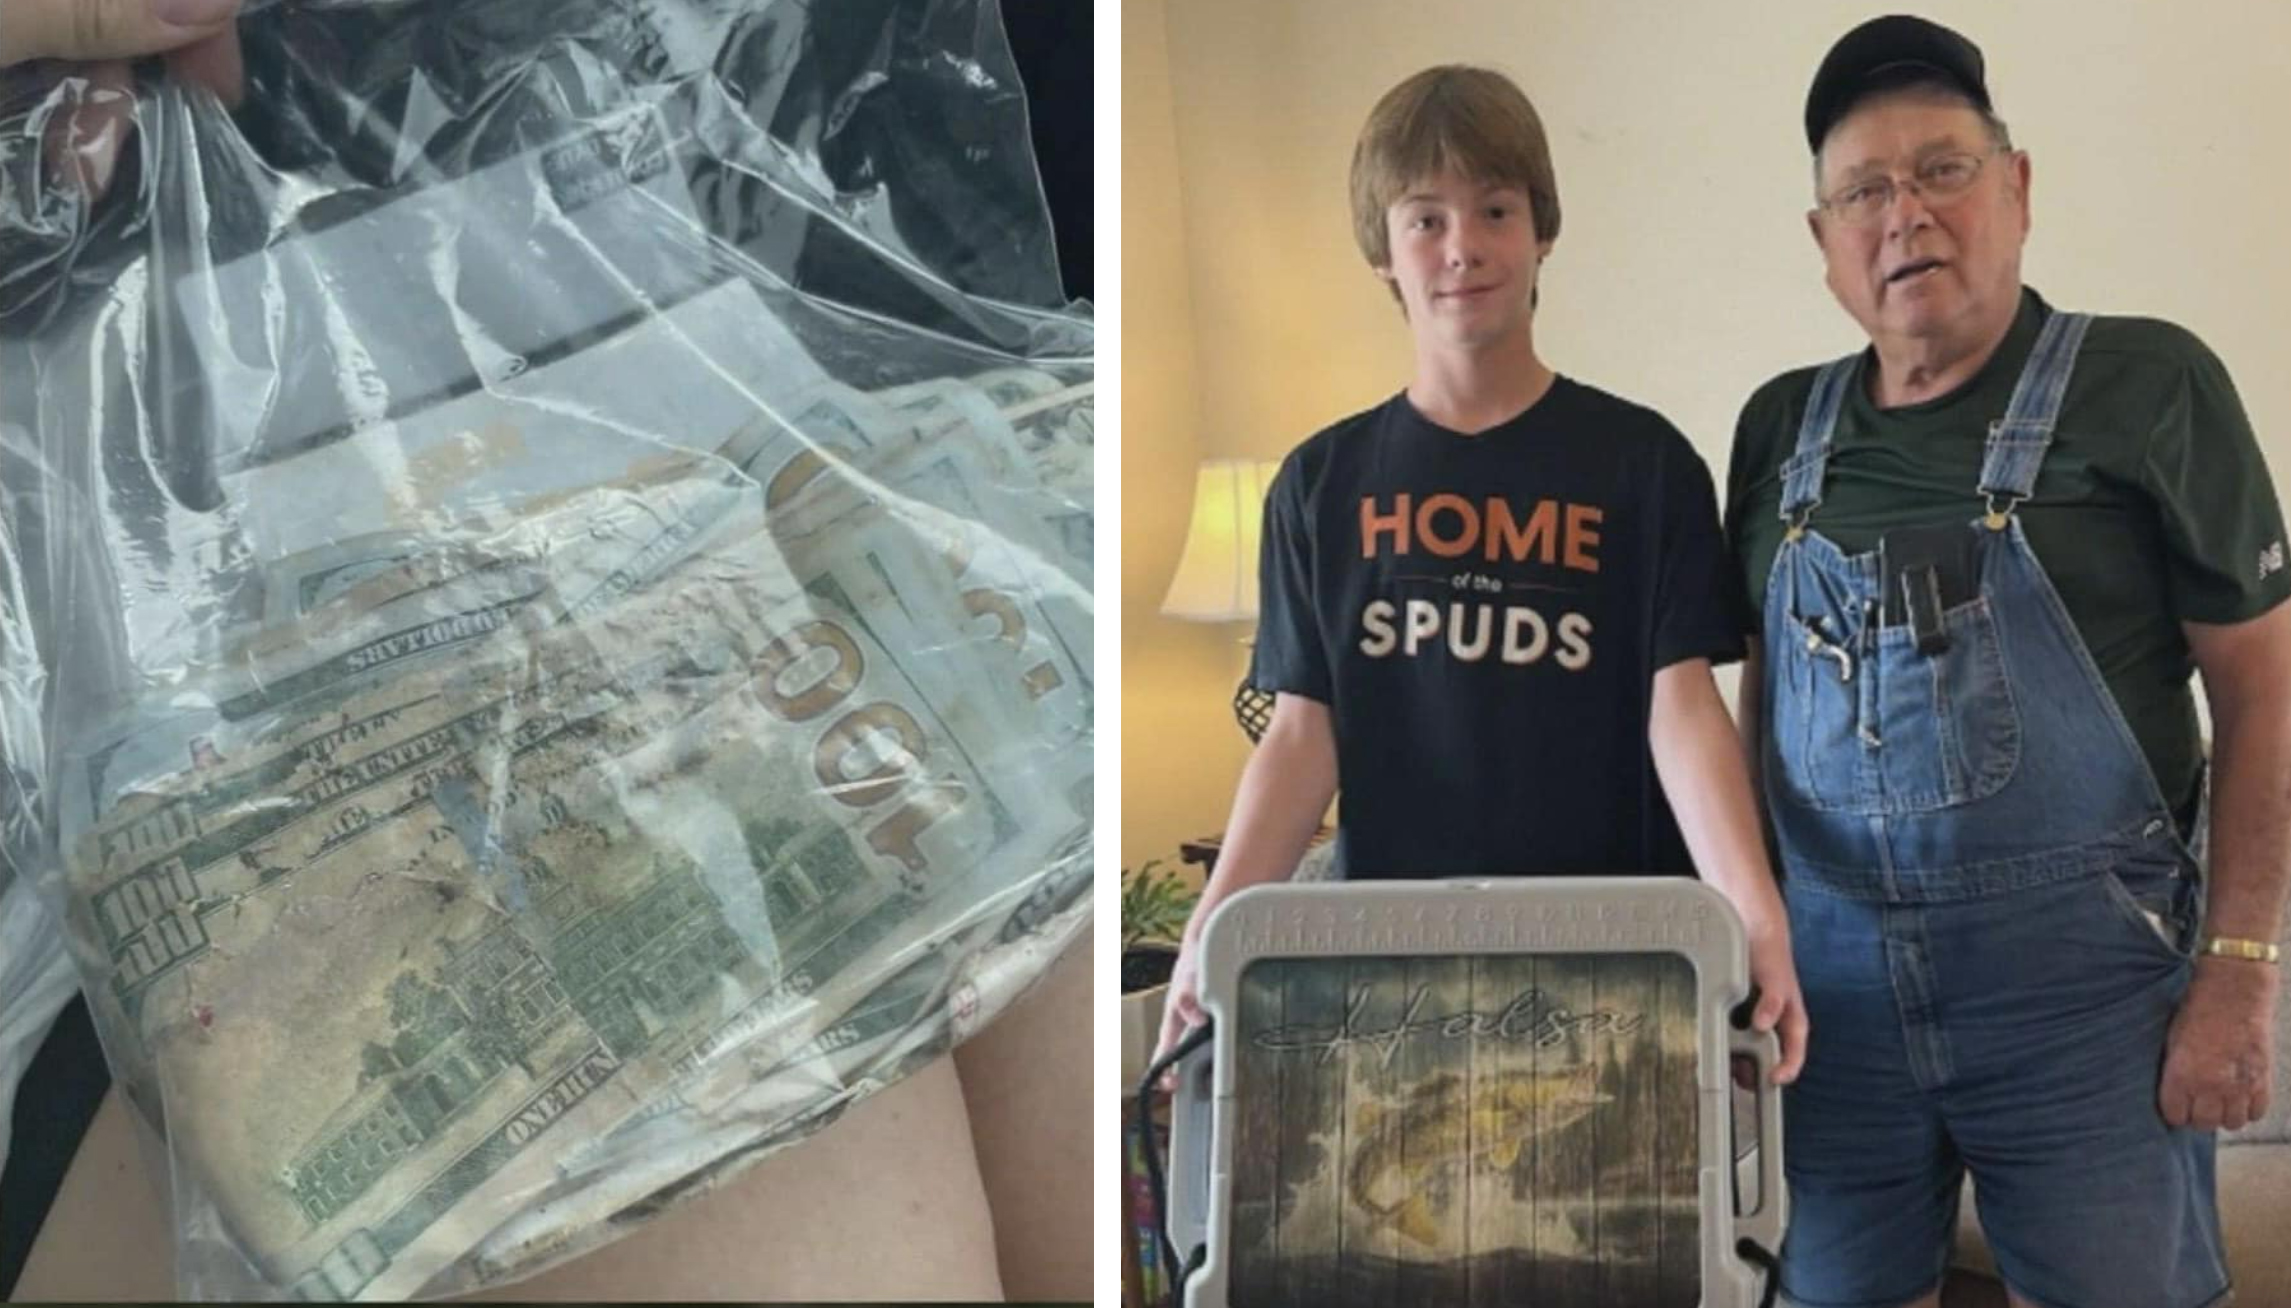 A 14 year old from Minnesota caught a wallet, and returned it to its owner.